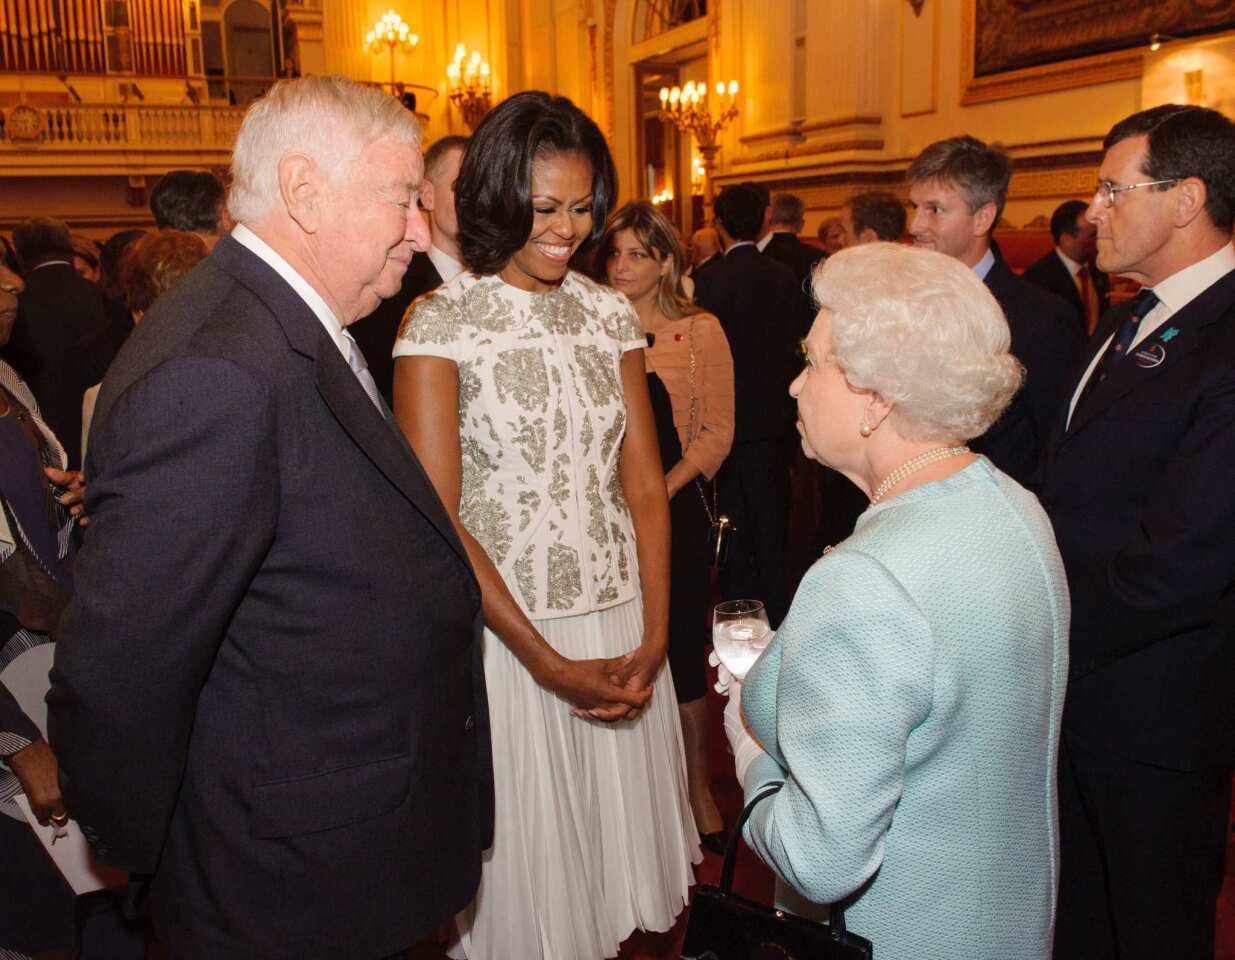 The First Lady and the Queen